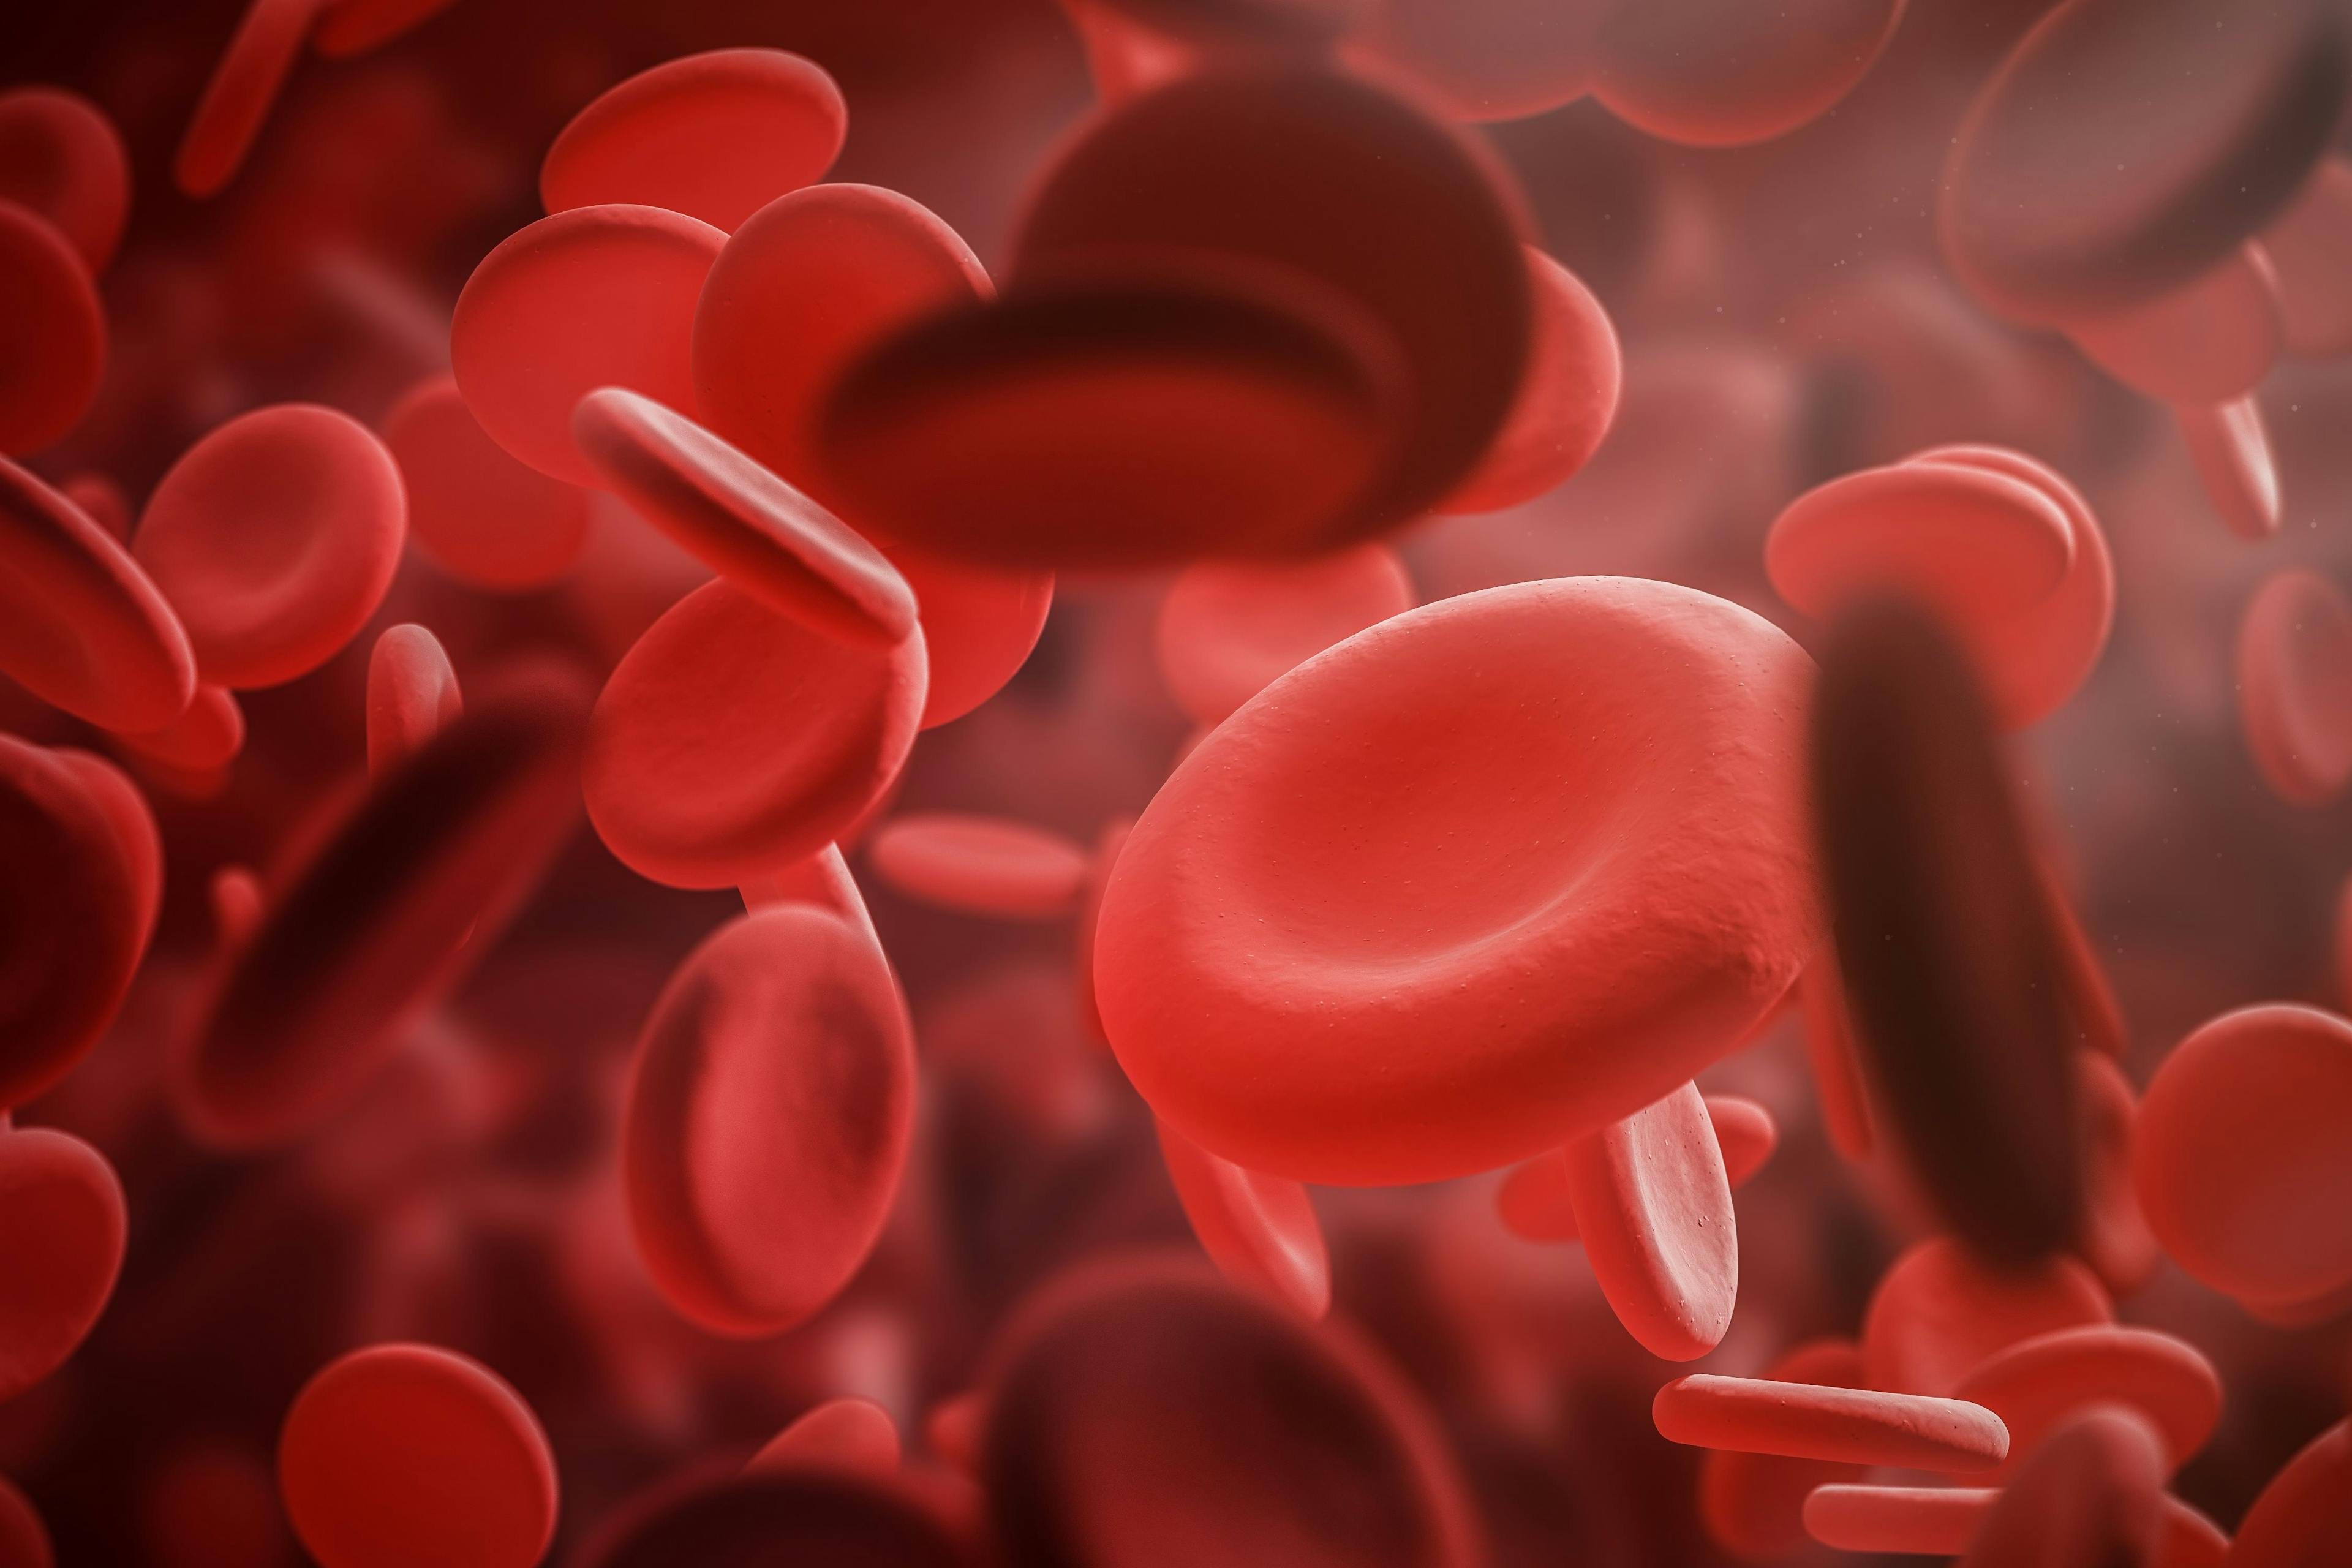 Red Blood Cell Concept | image credit: ImageFlow - stock.adobe.com